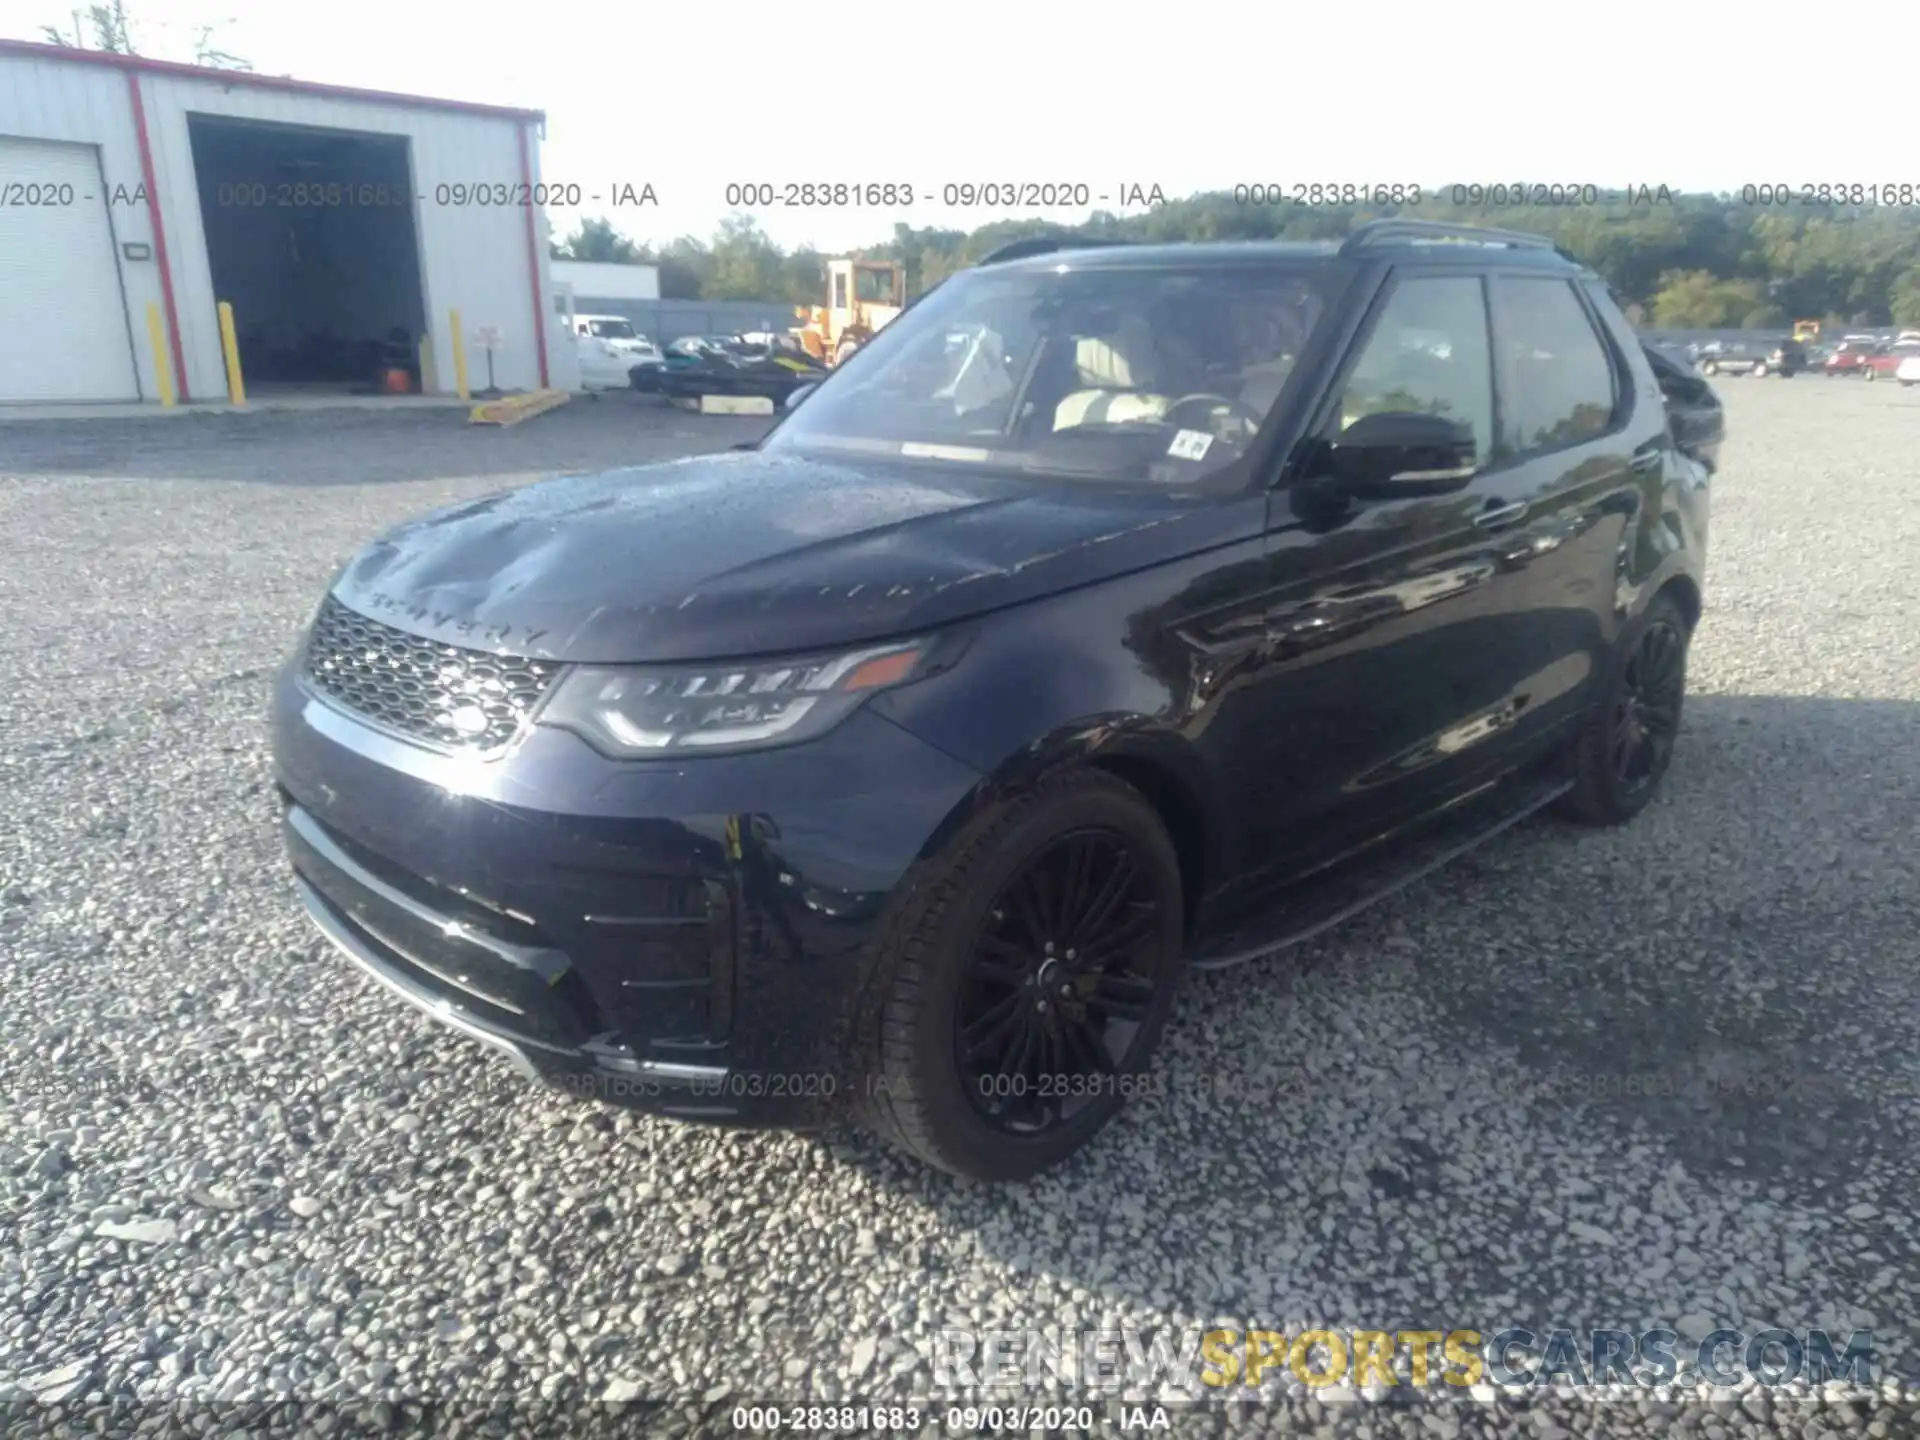 2 Photograph of a damaged car SALRT2RV0L2432176 LAND ROVER DISCOVERY 2020